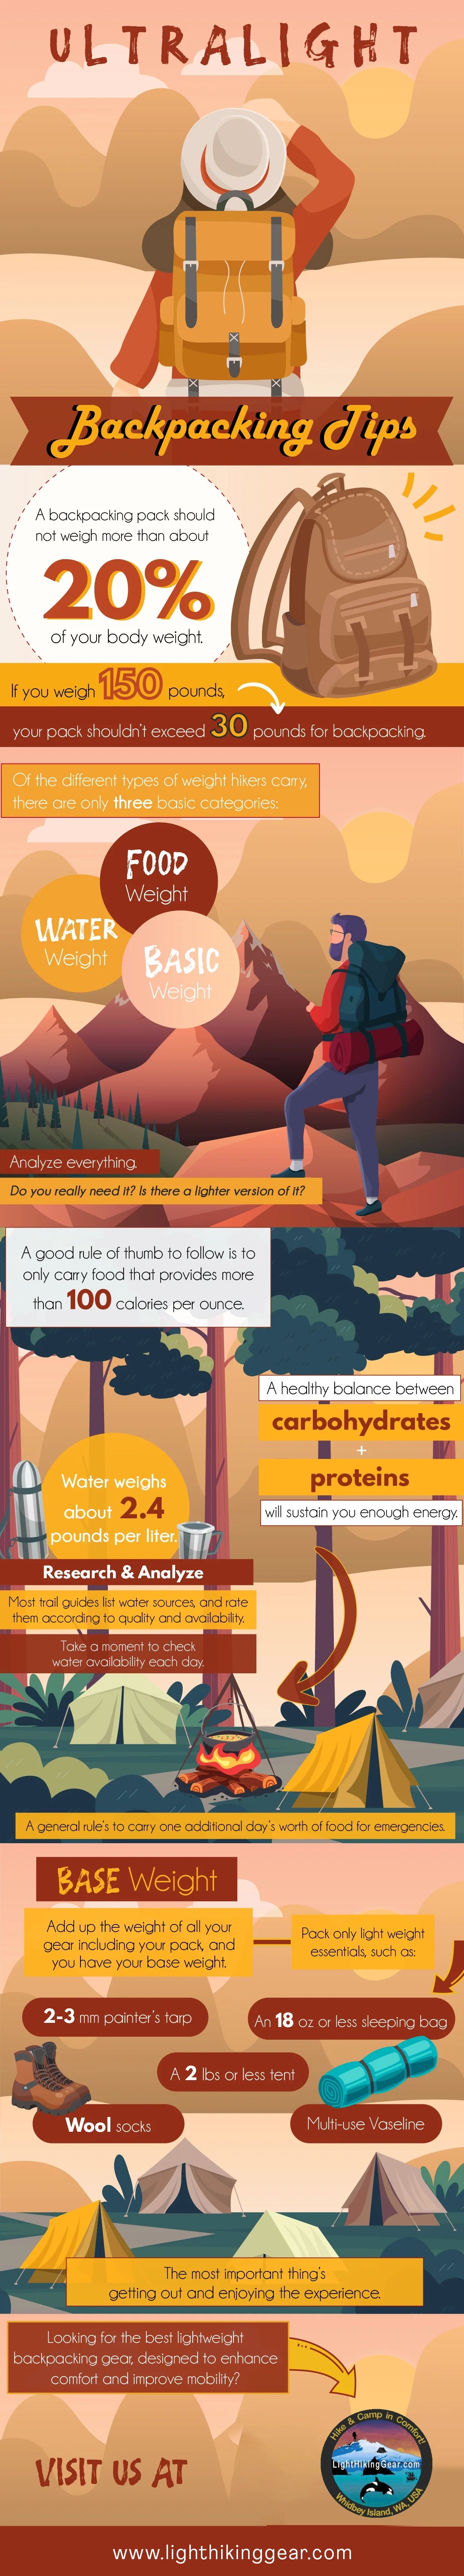 Ultralight Backpacking Tips | Infographic